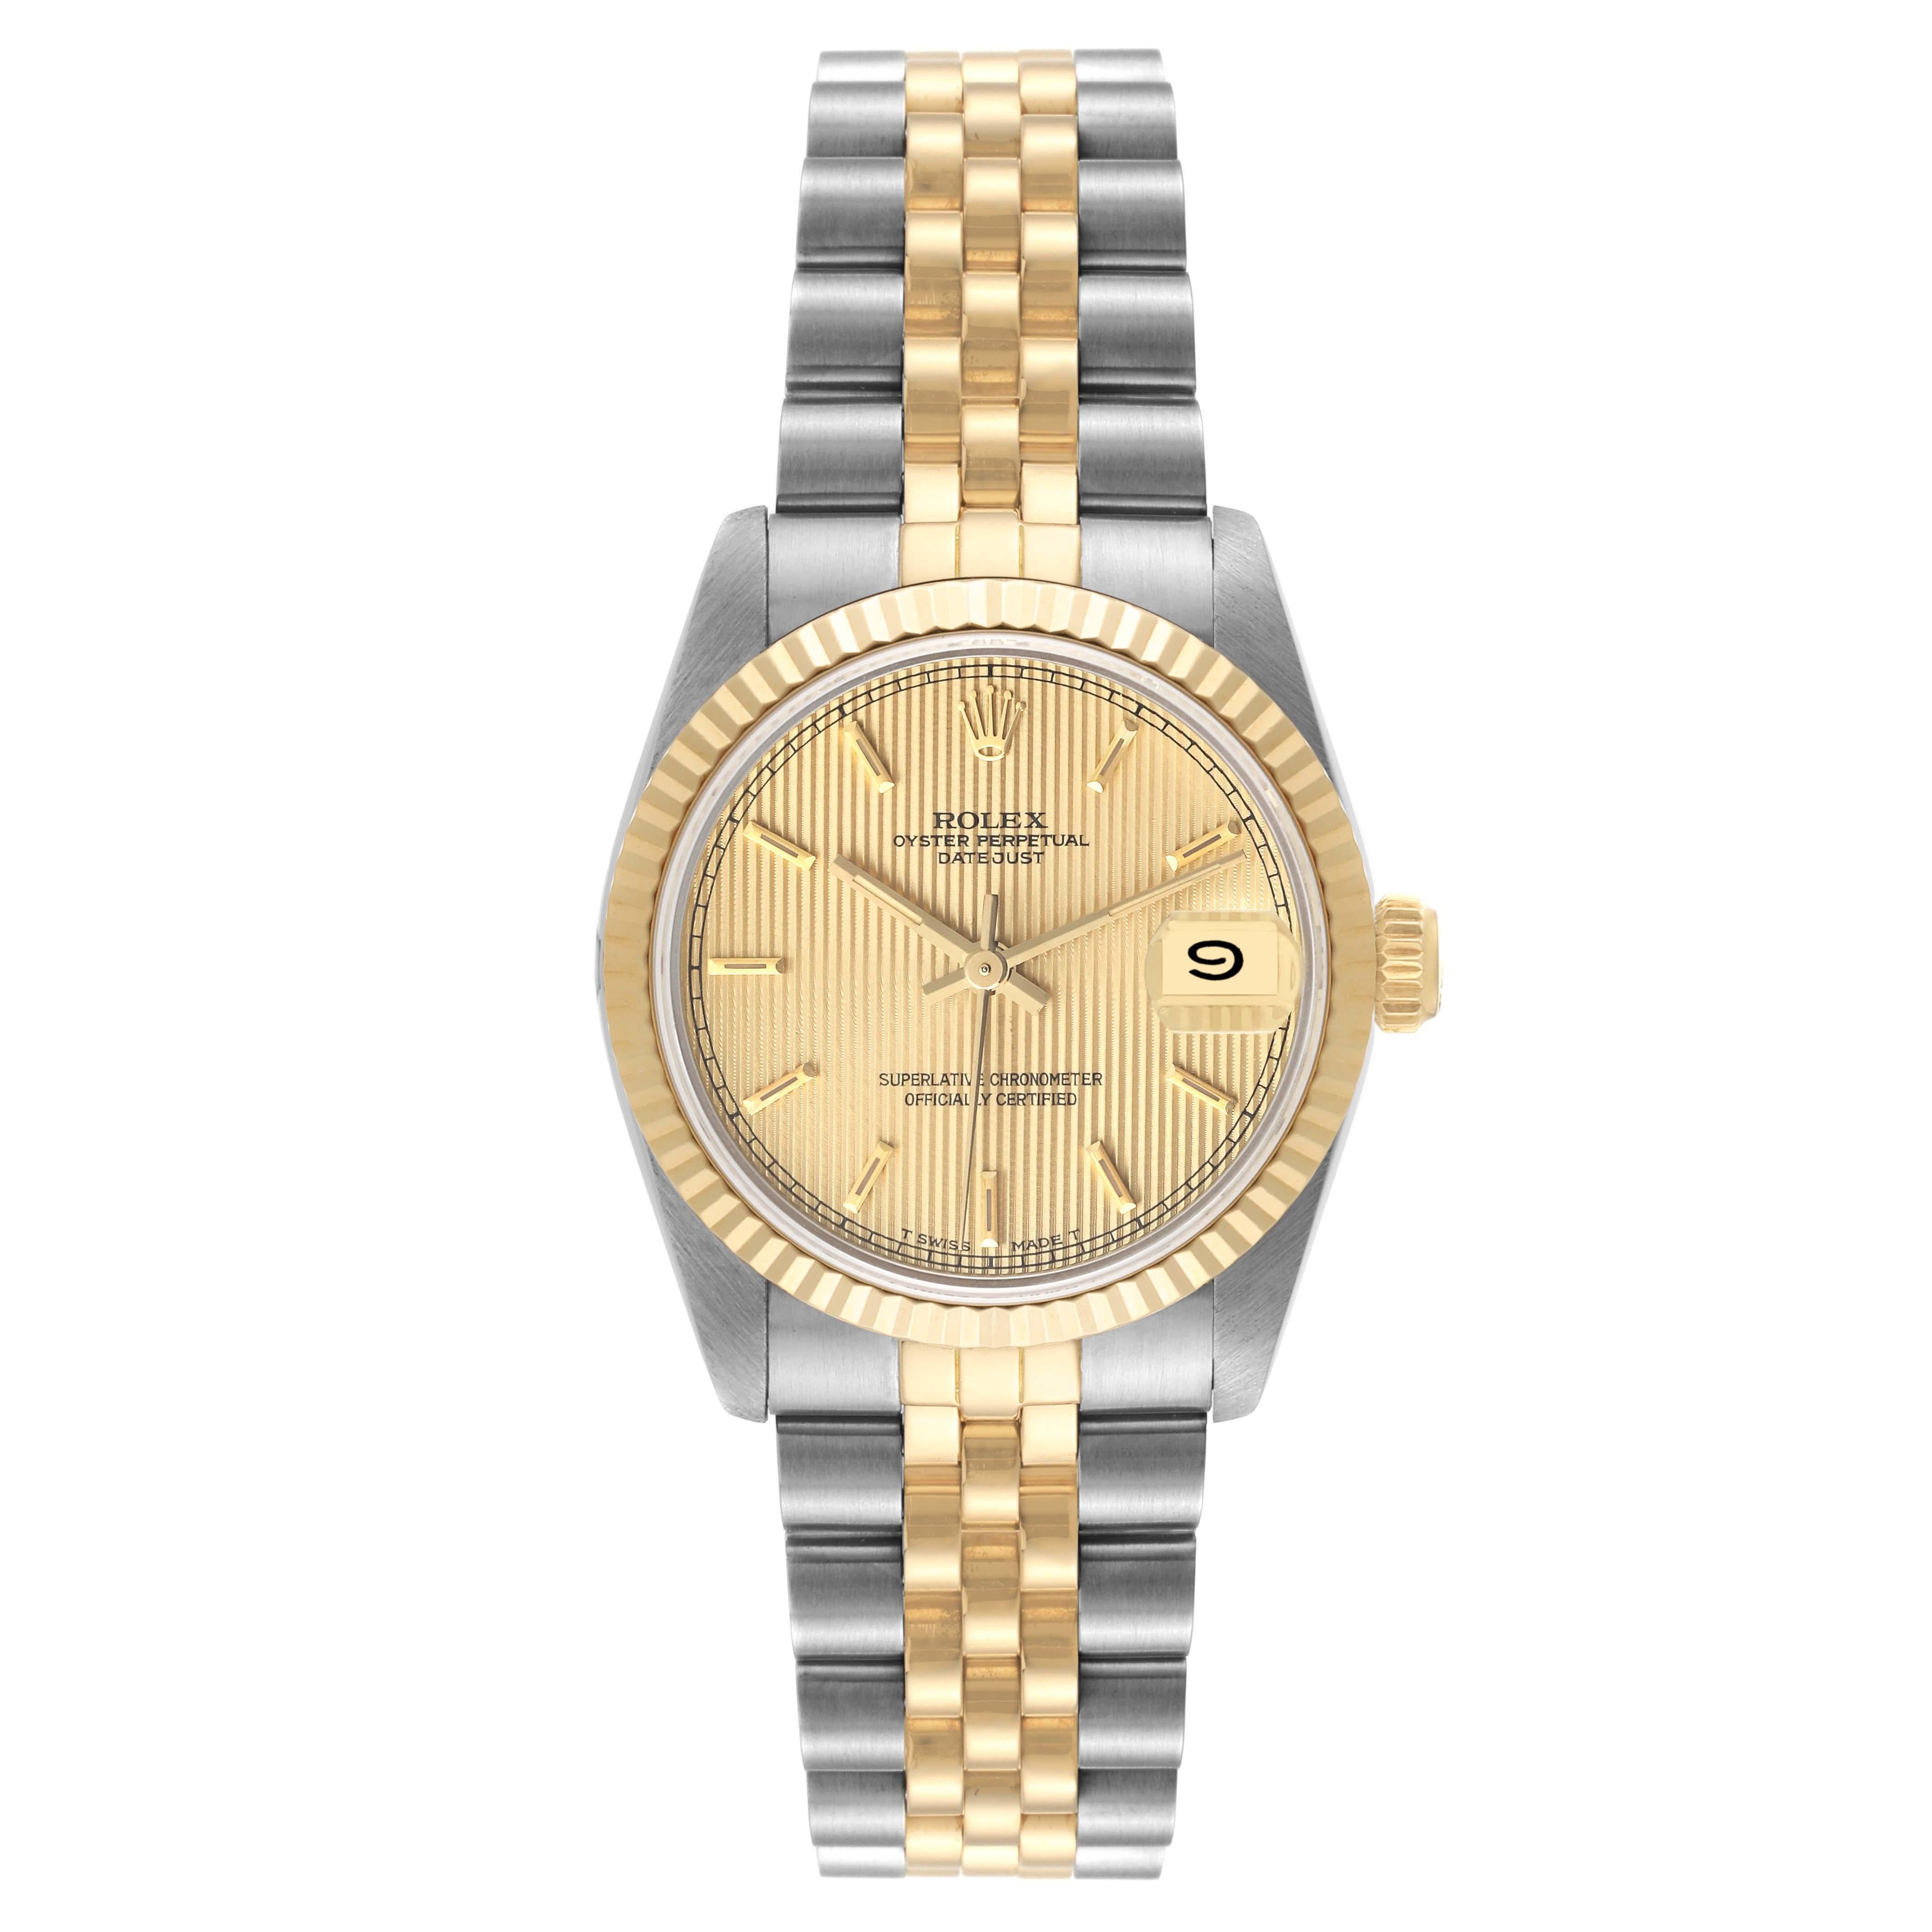 Rolex Datejust Midsize Tapestry Dial Steel Yellow Gold Ladies Watch 68273. Officially certified chronometer automatic self-winding movement. Stainless steel oyster case 31 mm in diameter. Rolex logo on an 18K yellow gold crown. 18k yellow gold